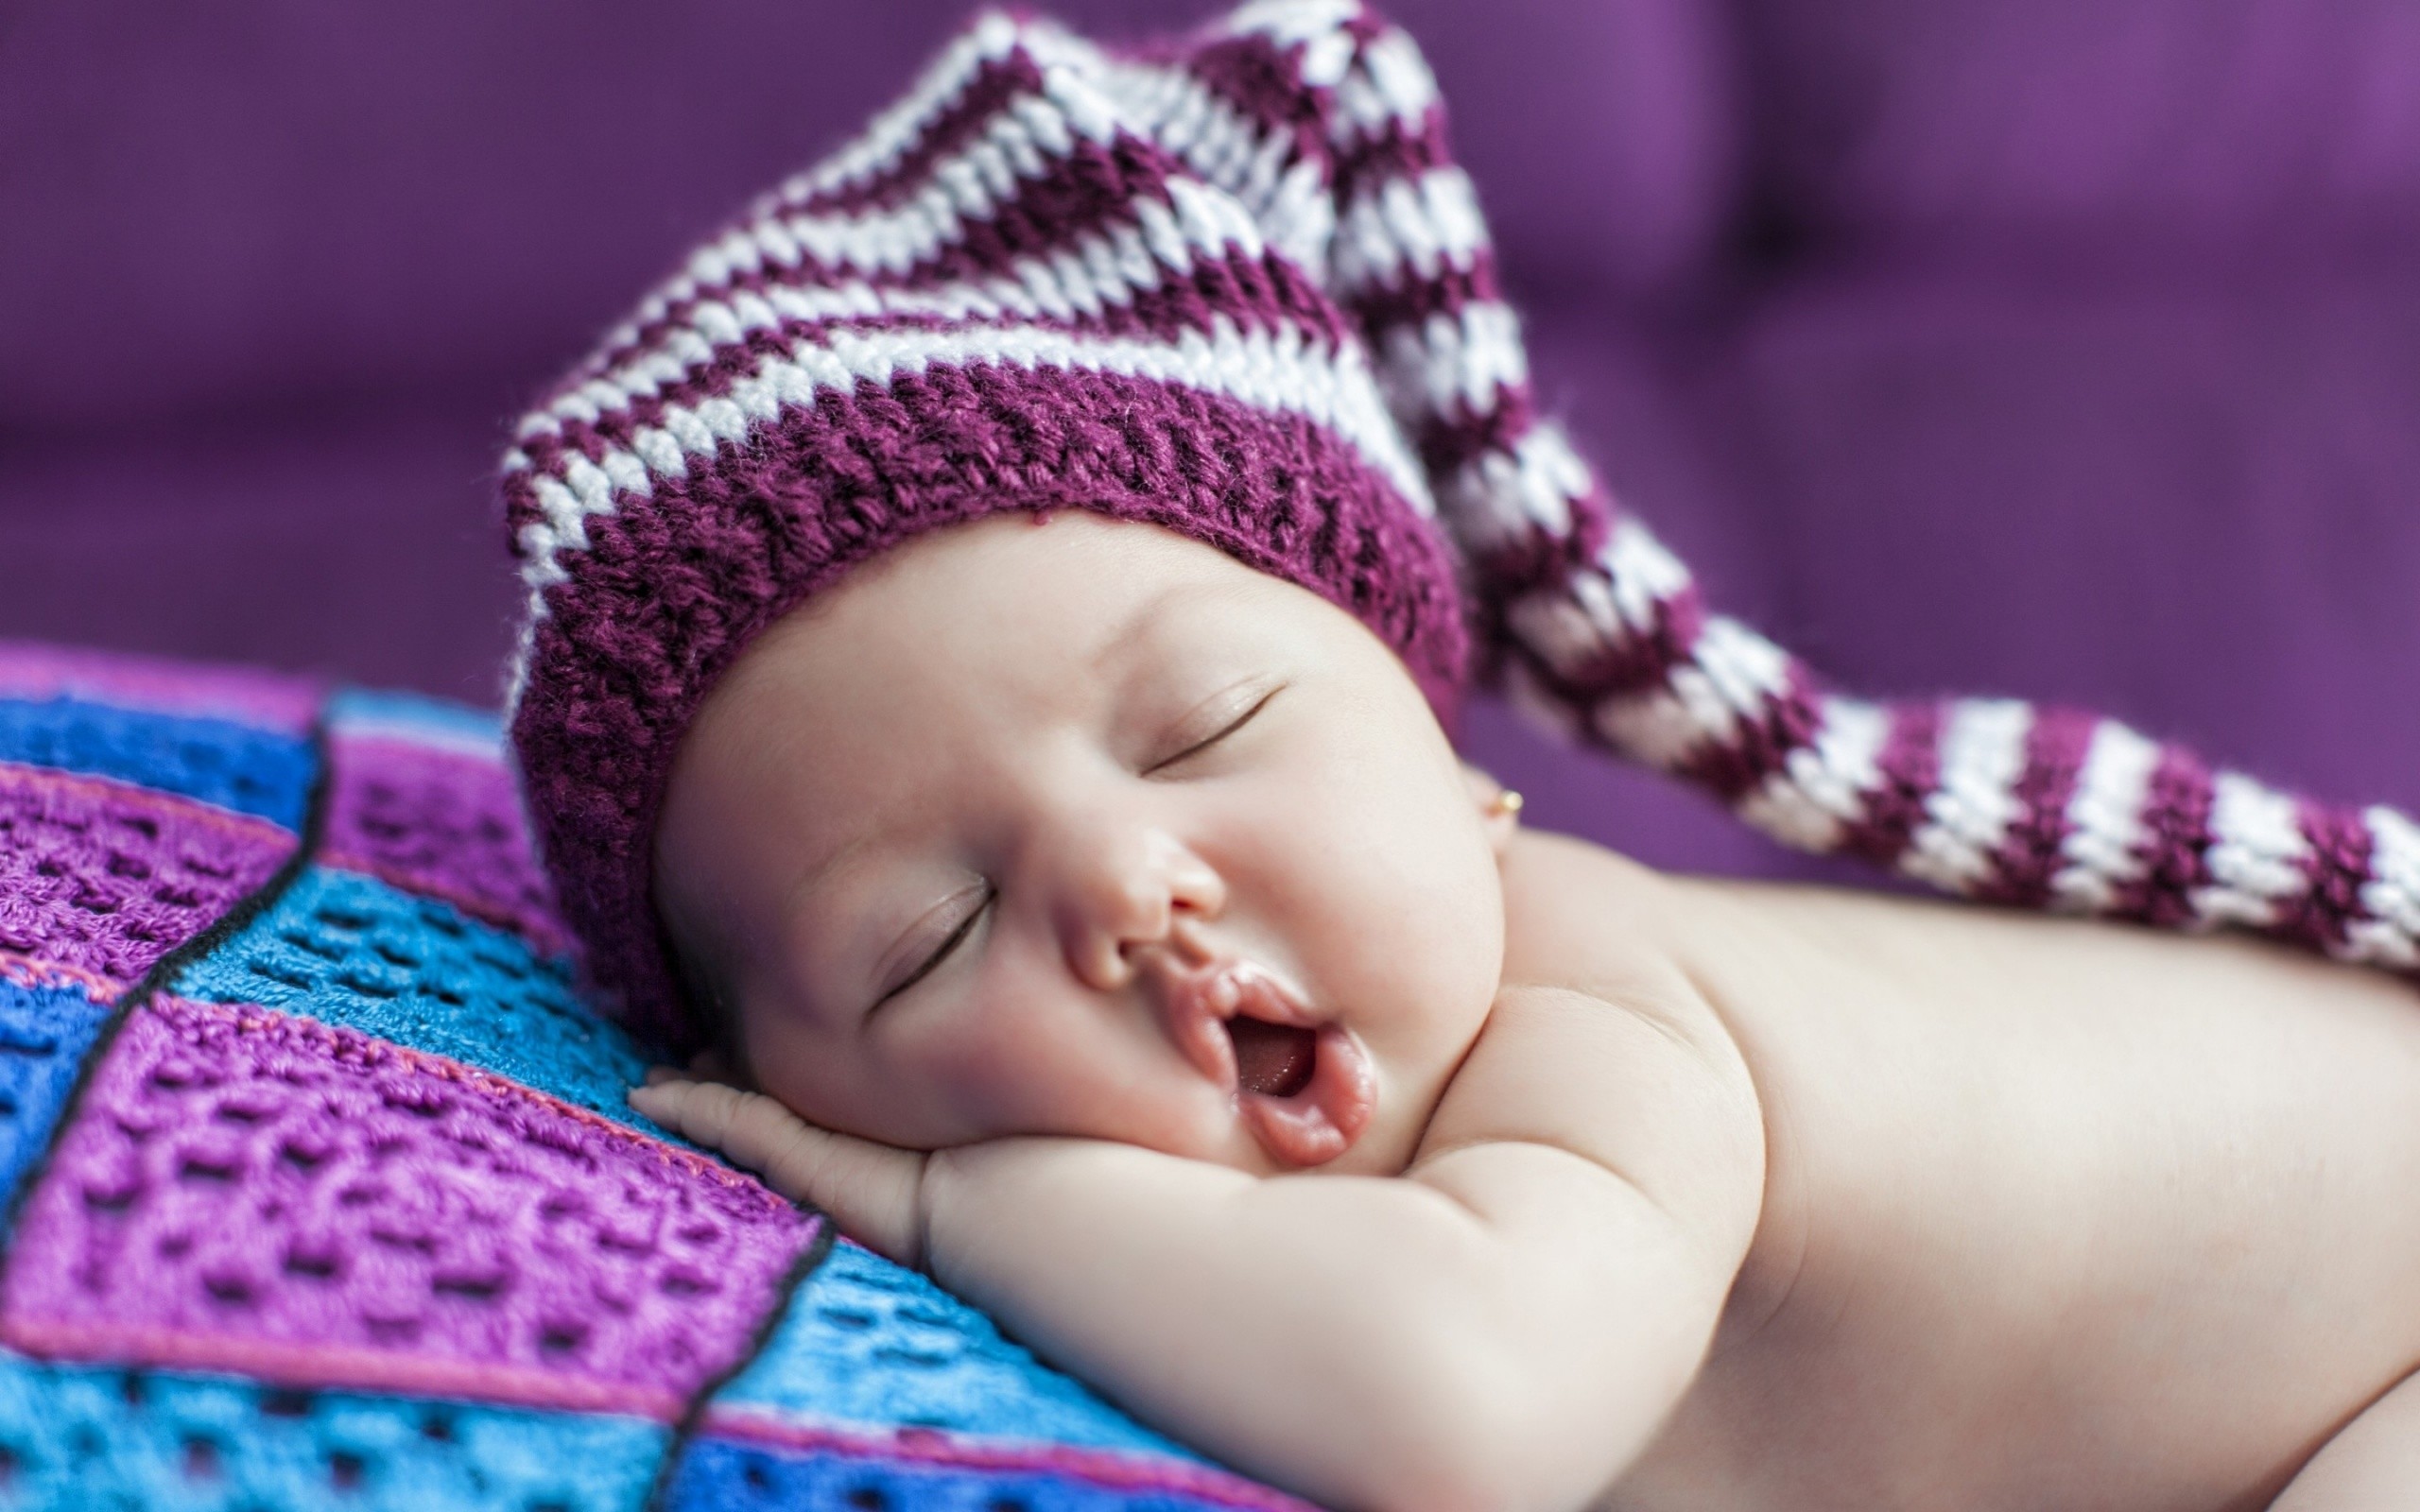 2560x1600 funny sleep baby wallpaper hd windows 10 backgrounds amazing free download  wallpapers hi res quality images computer wallpapers artwork 2560Ã1600  Wallpaper ...